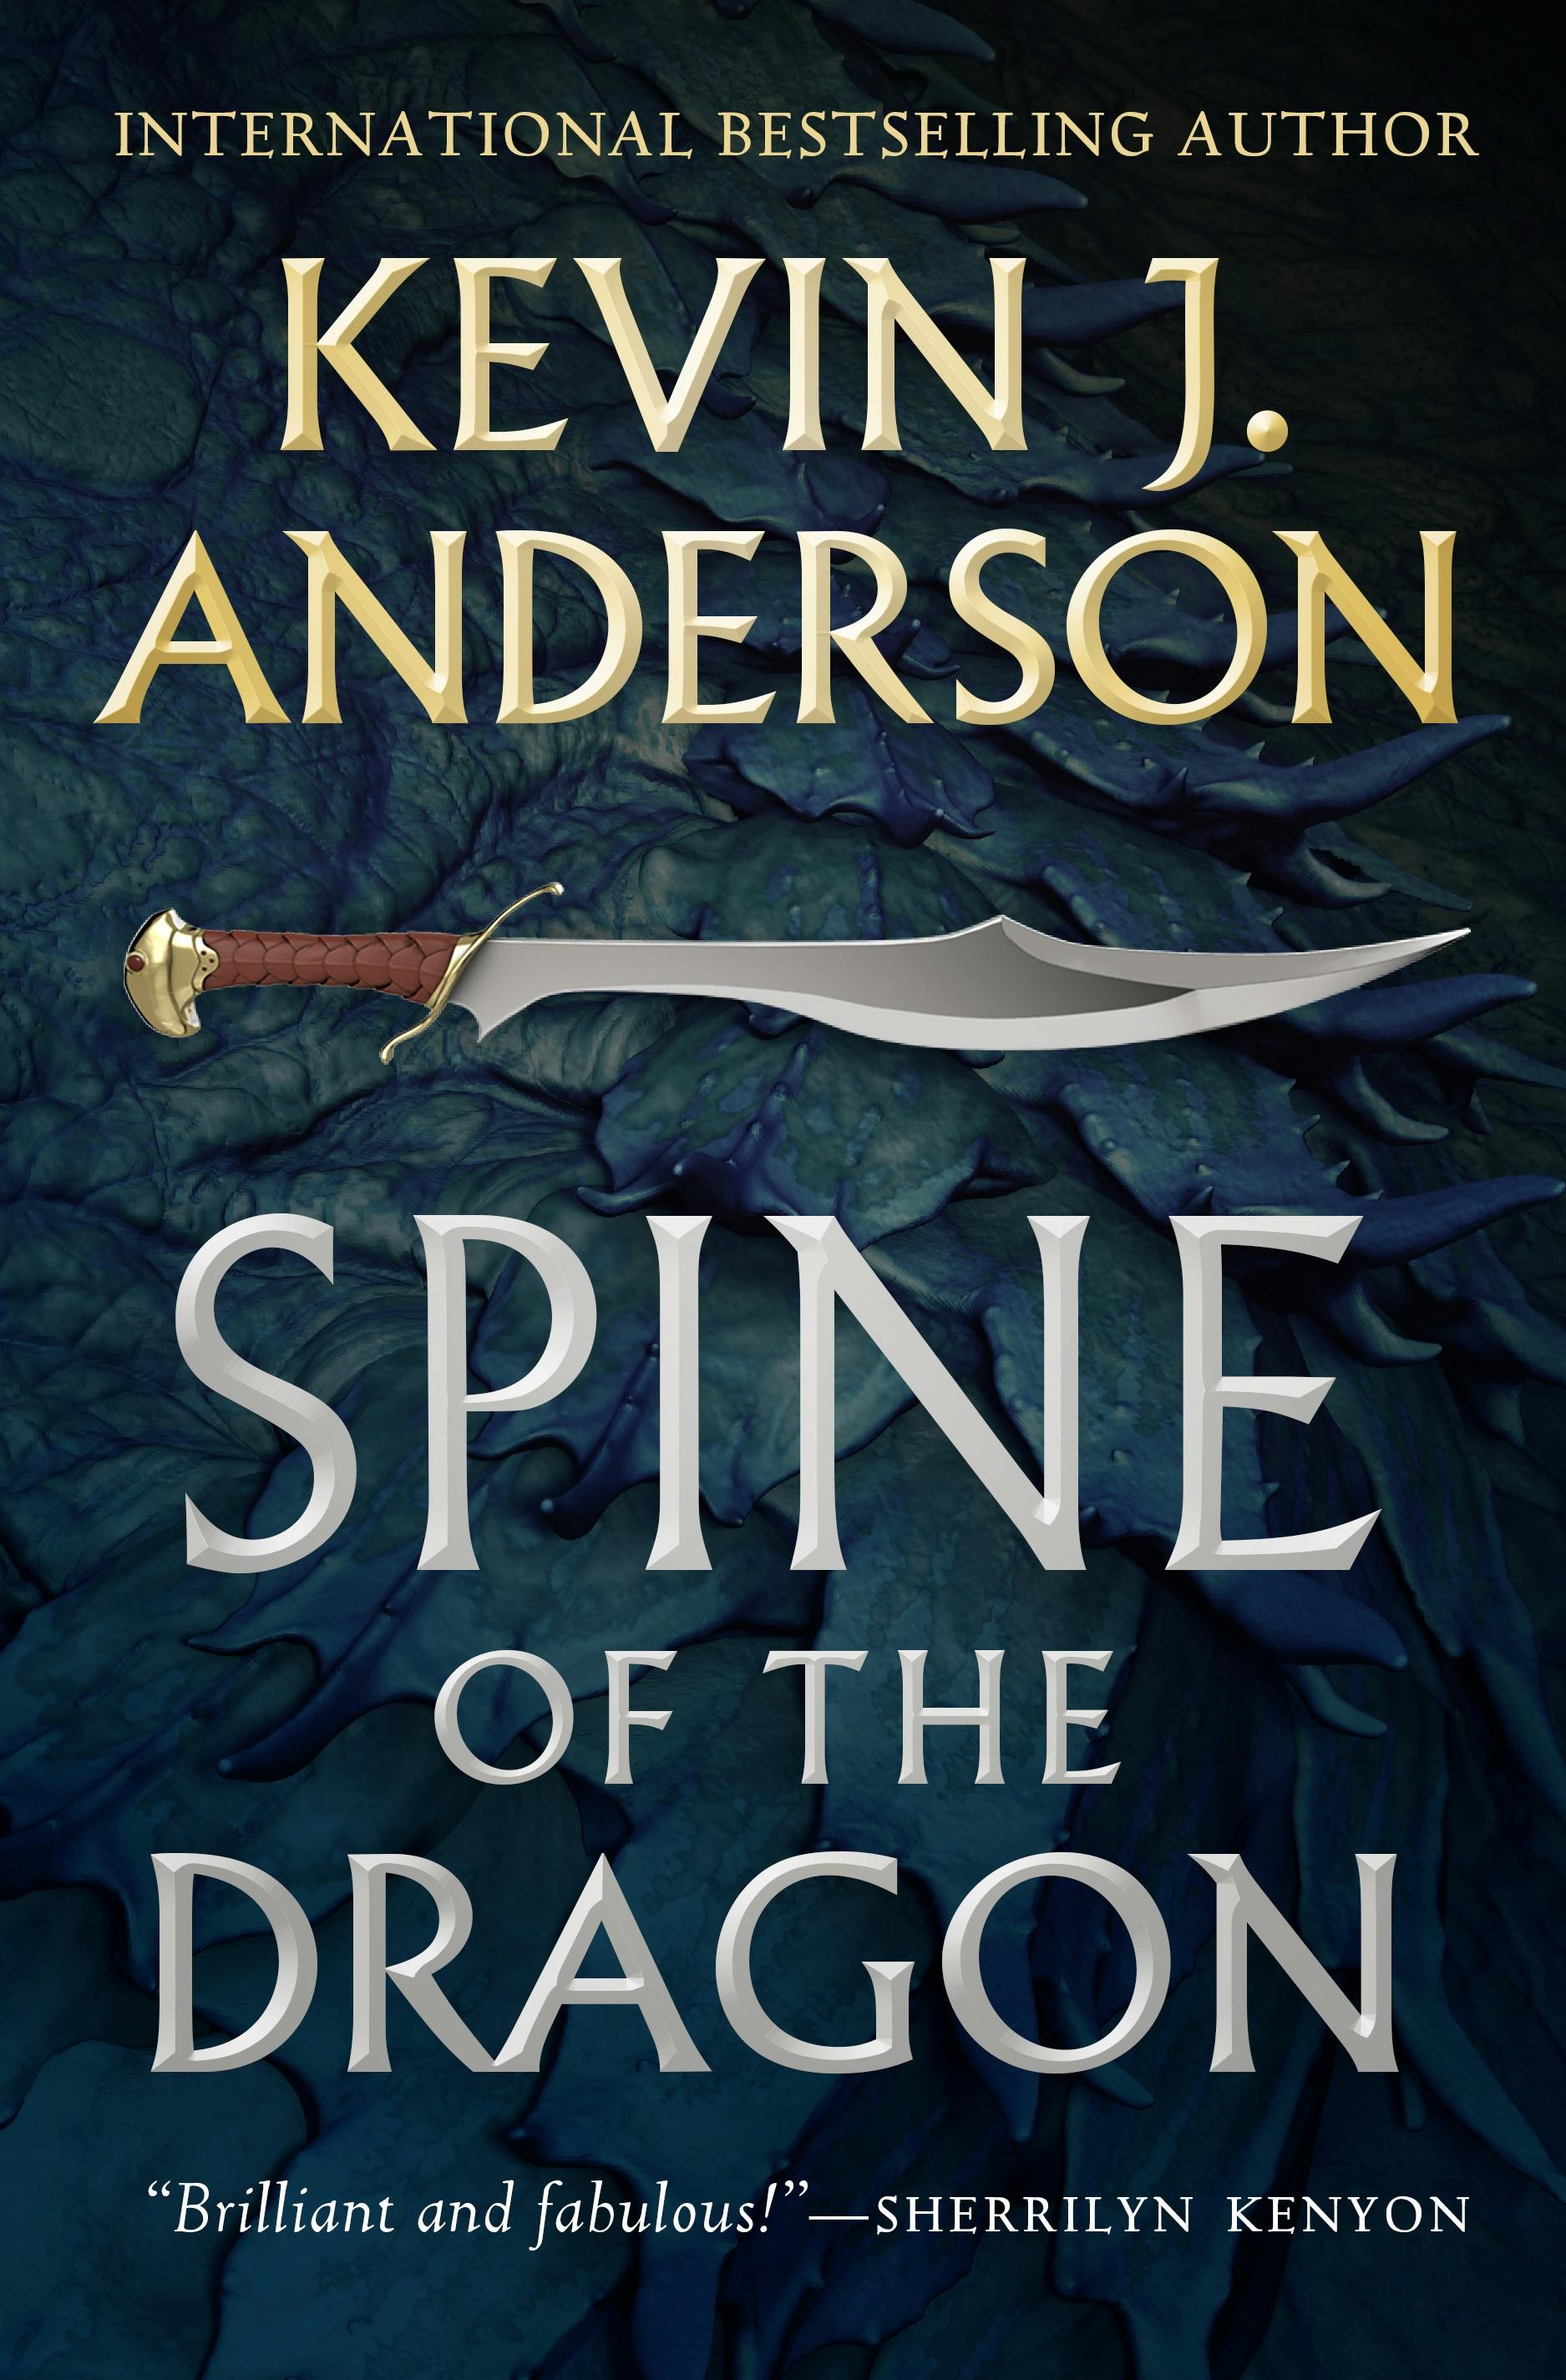 Cover for the book titled as: Spine of the Dragon